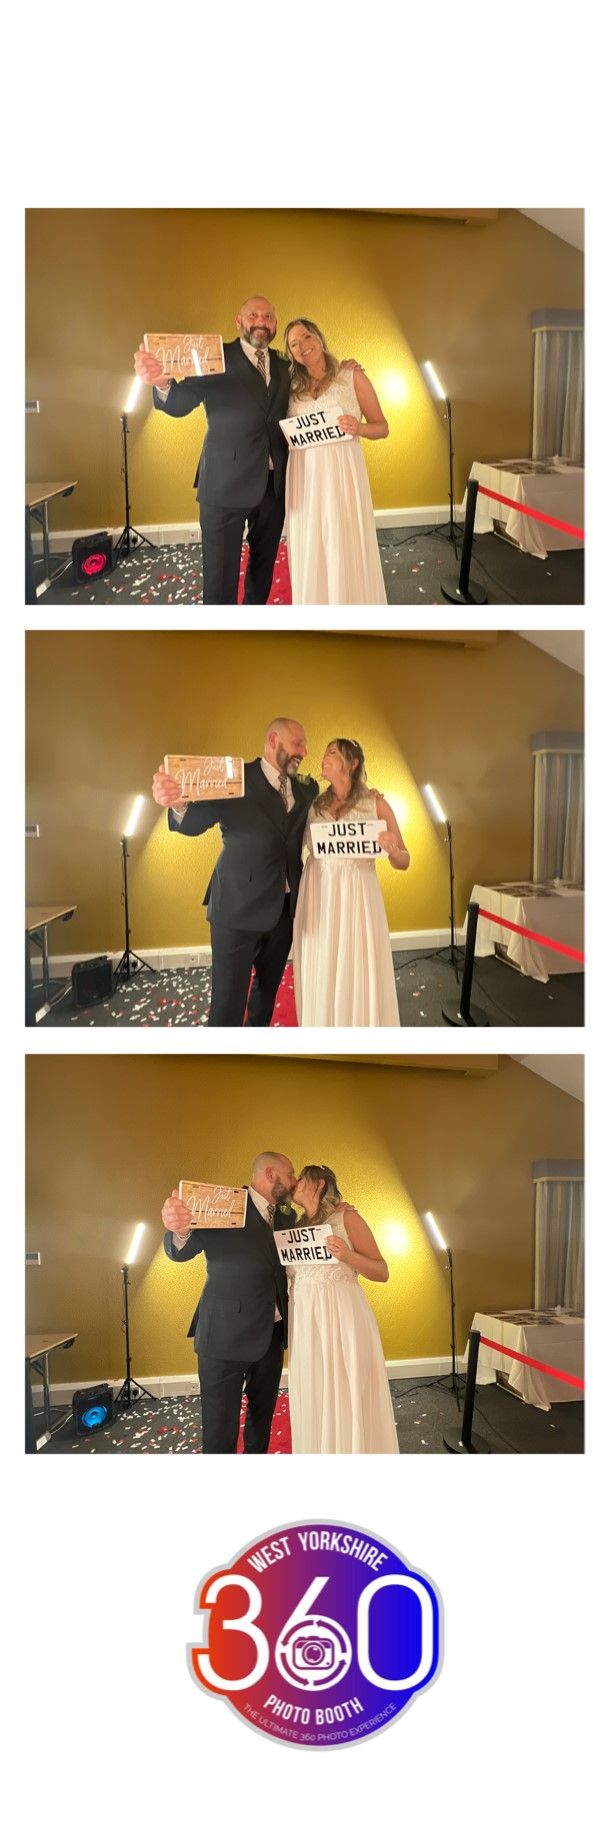 West Yorkshire 360 Photo Booth-Image-2